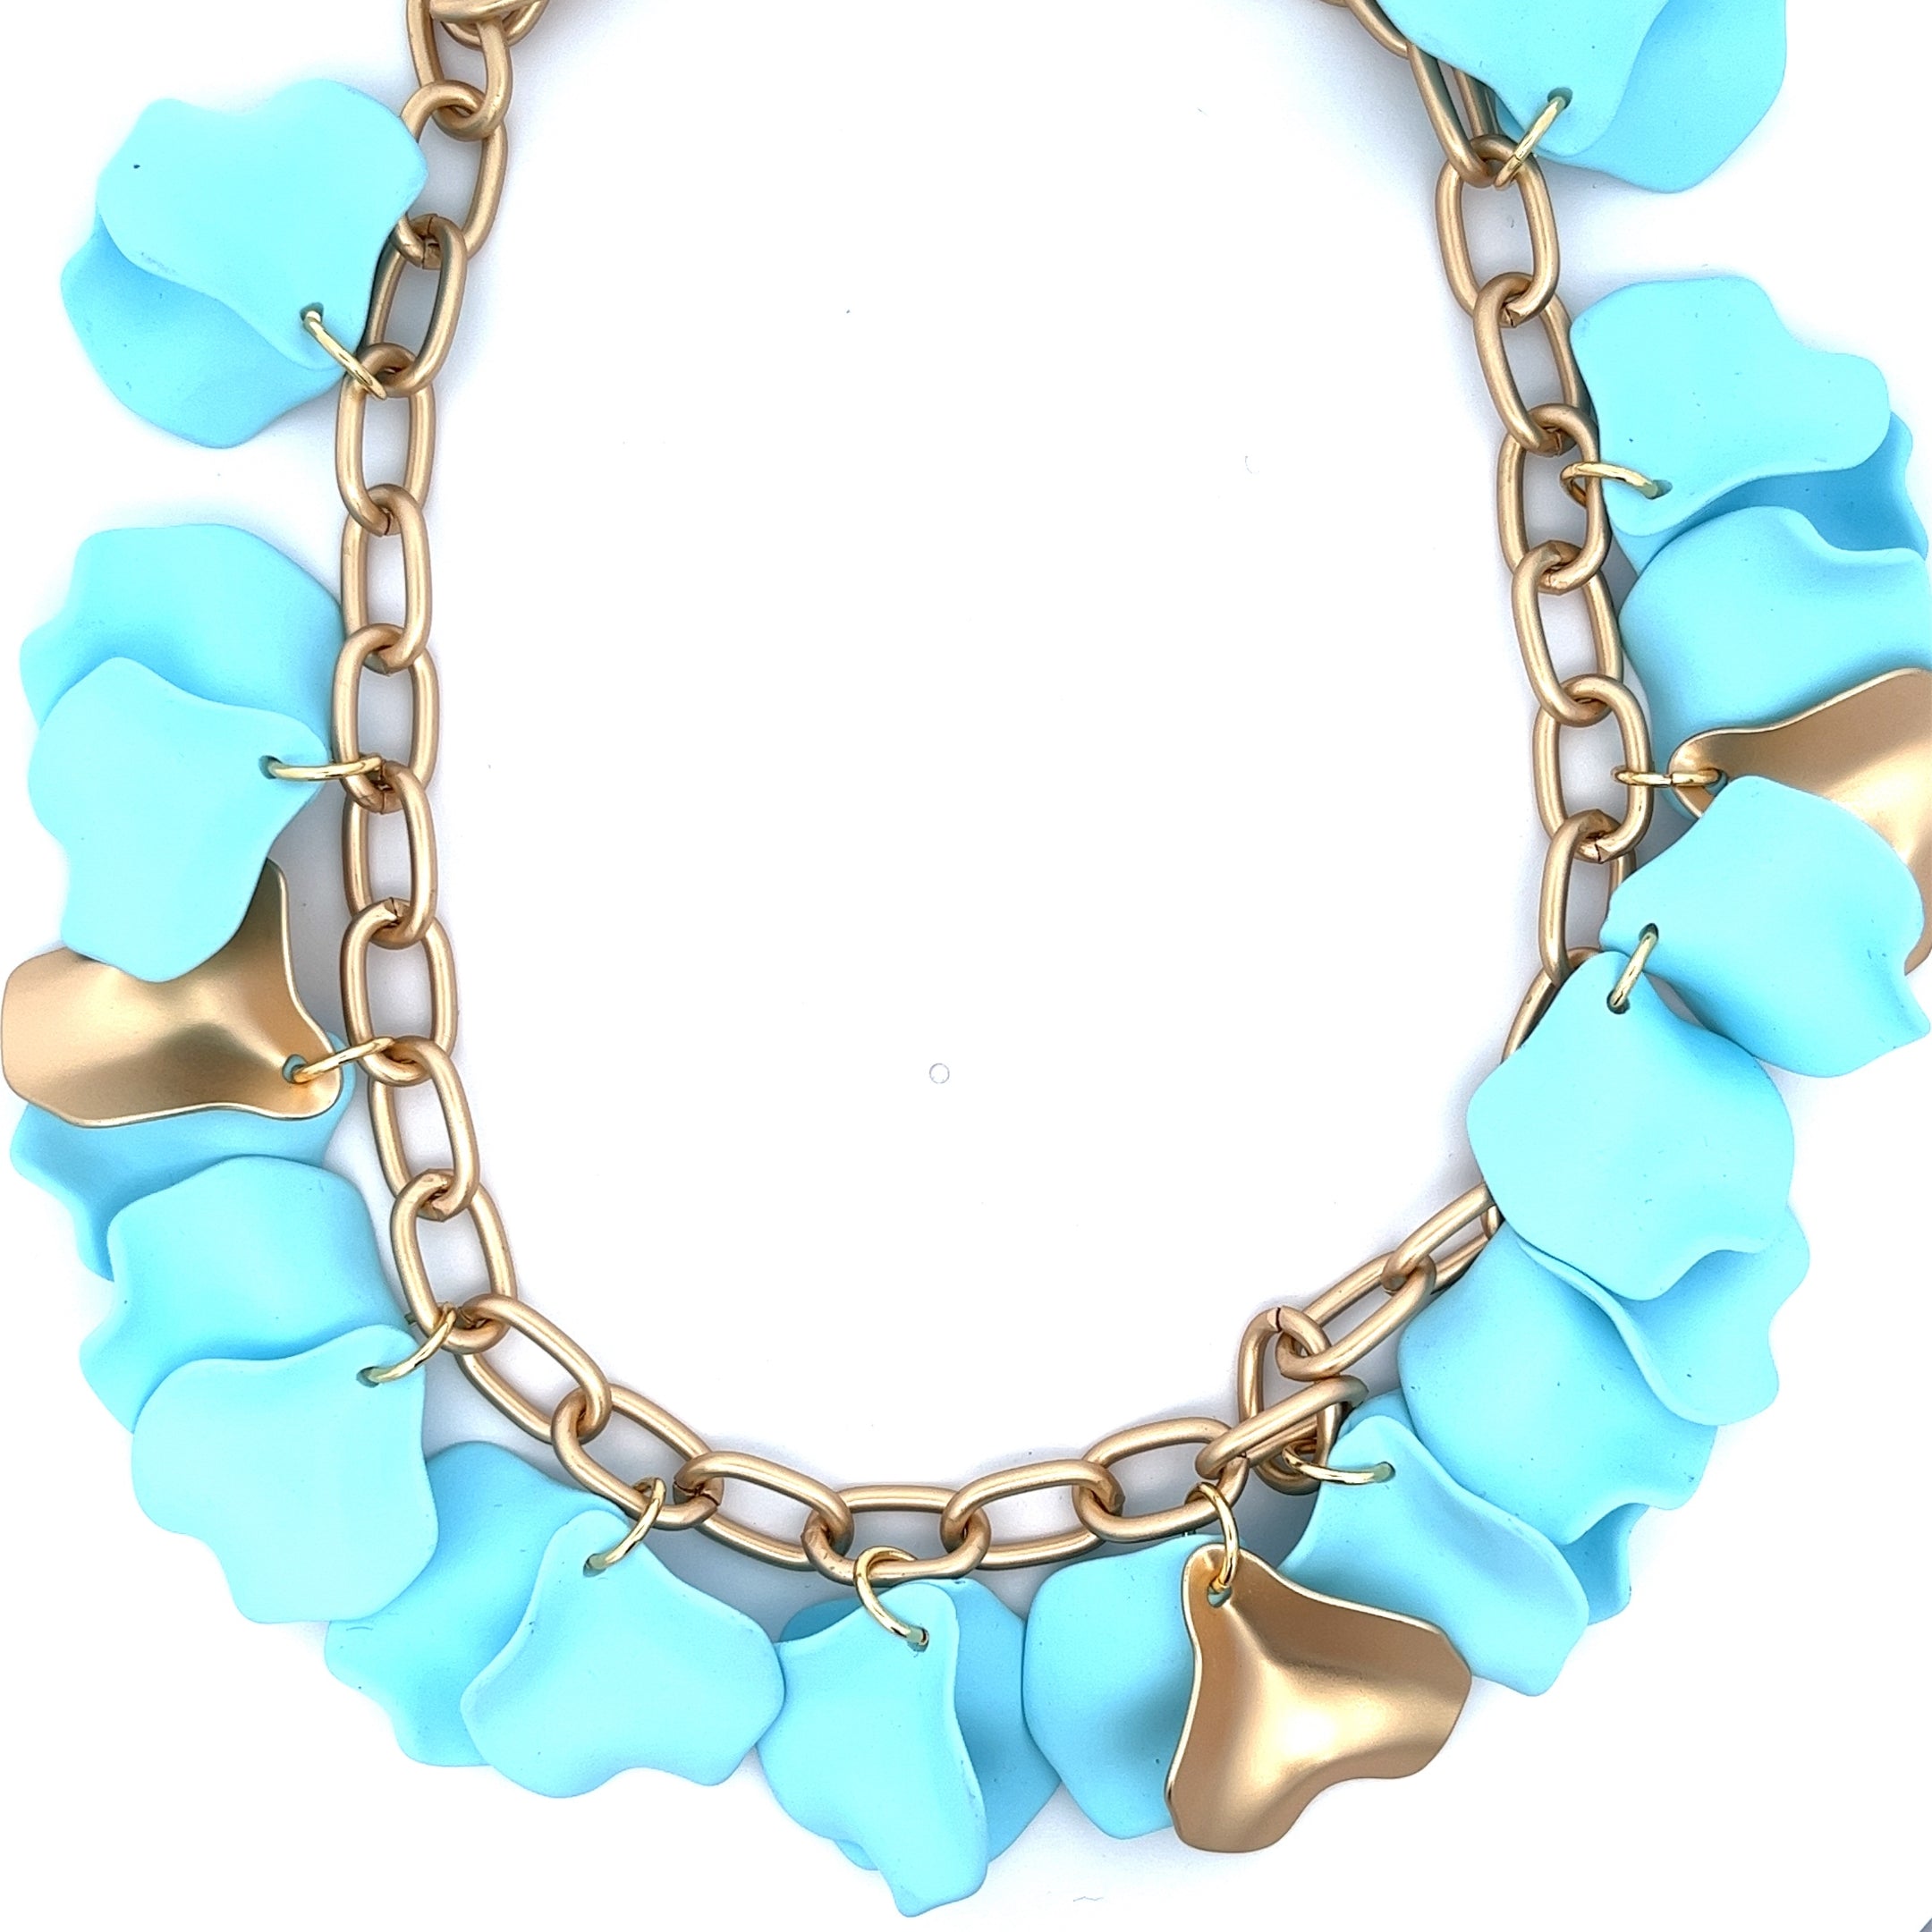 MATTE GOLD CHAIN NECKLACE WIHT LIGHT BLUE AND GOLD PETALS